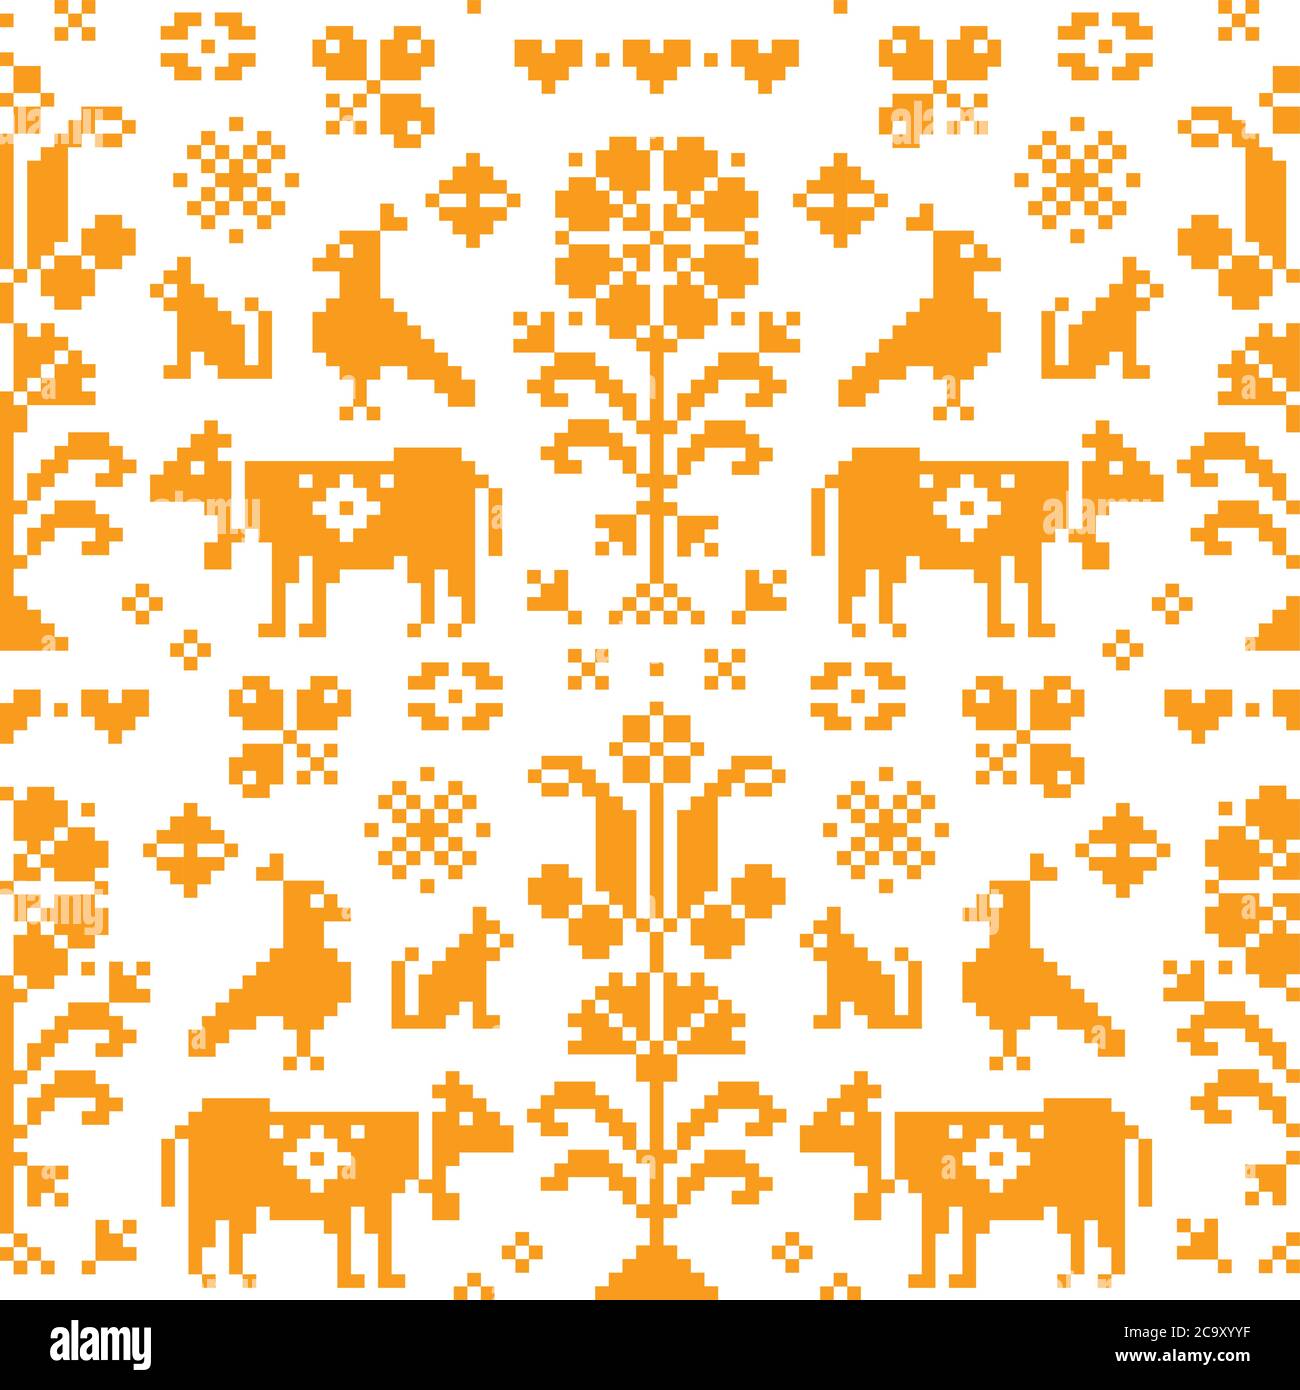 Austrian and German cross-stitch vector seamless folk art pattern, emrboidery tile design with birds, dogs, cows, hearts and flowers Stock Vector